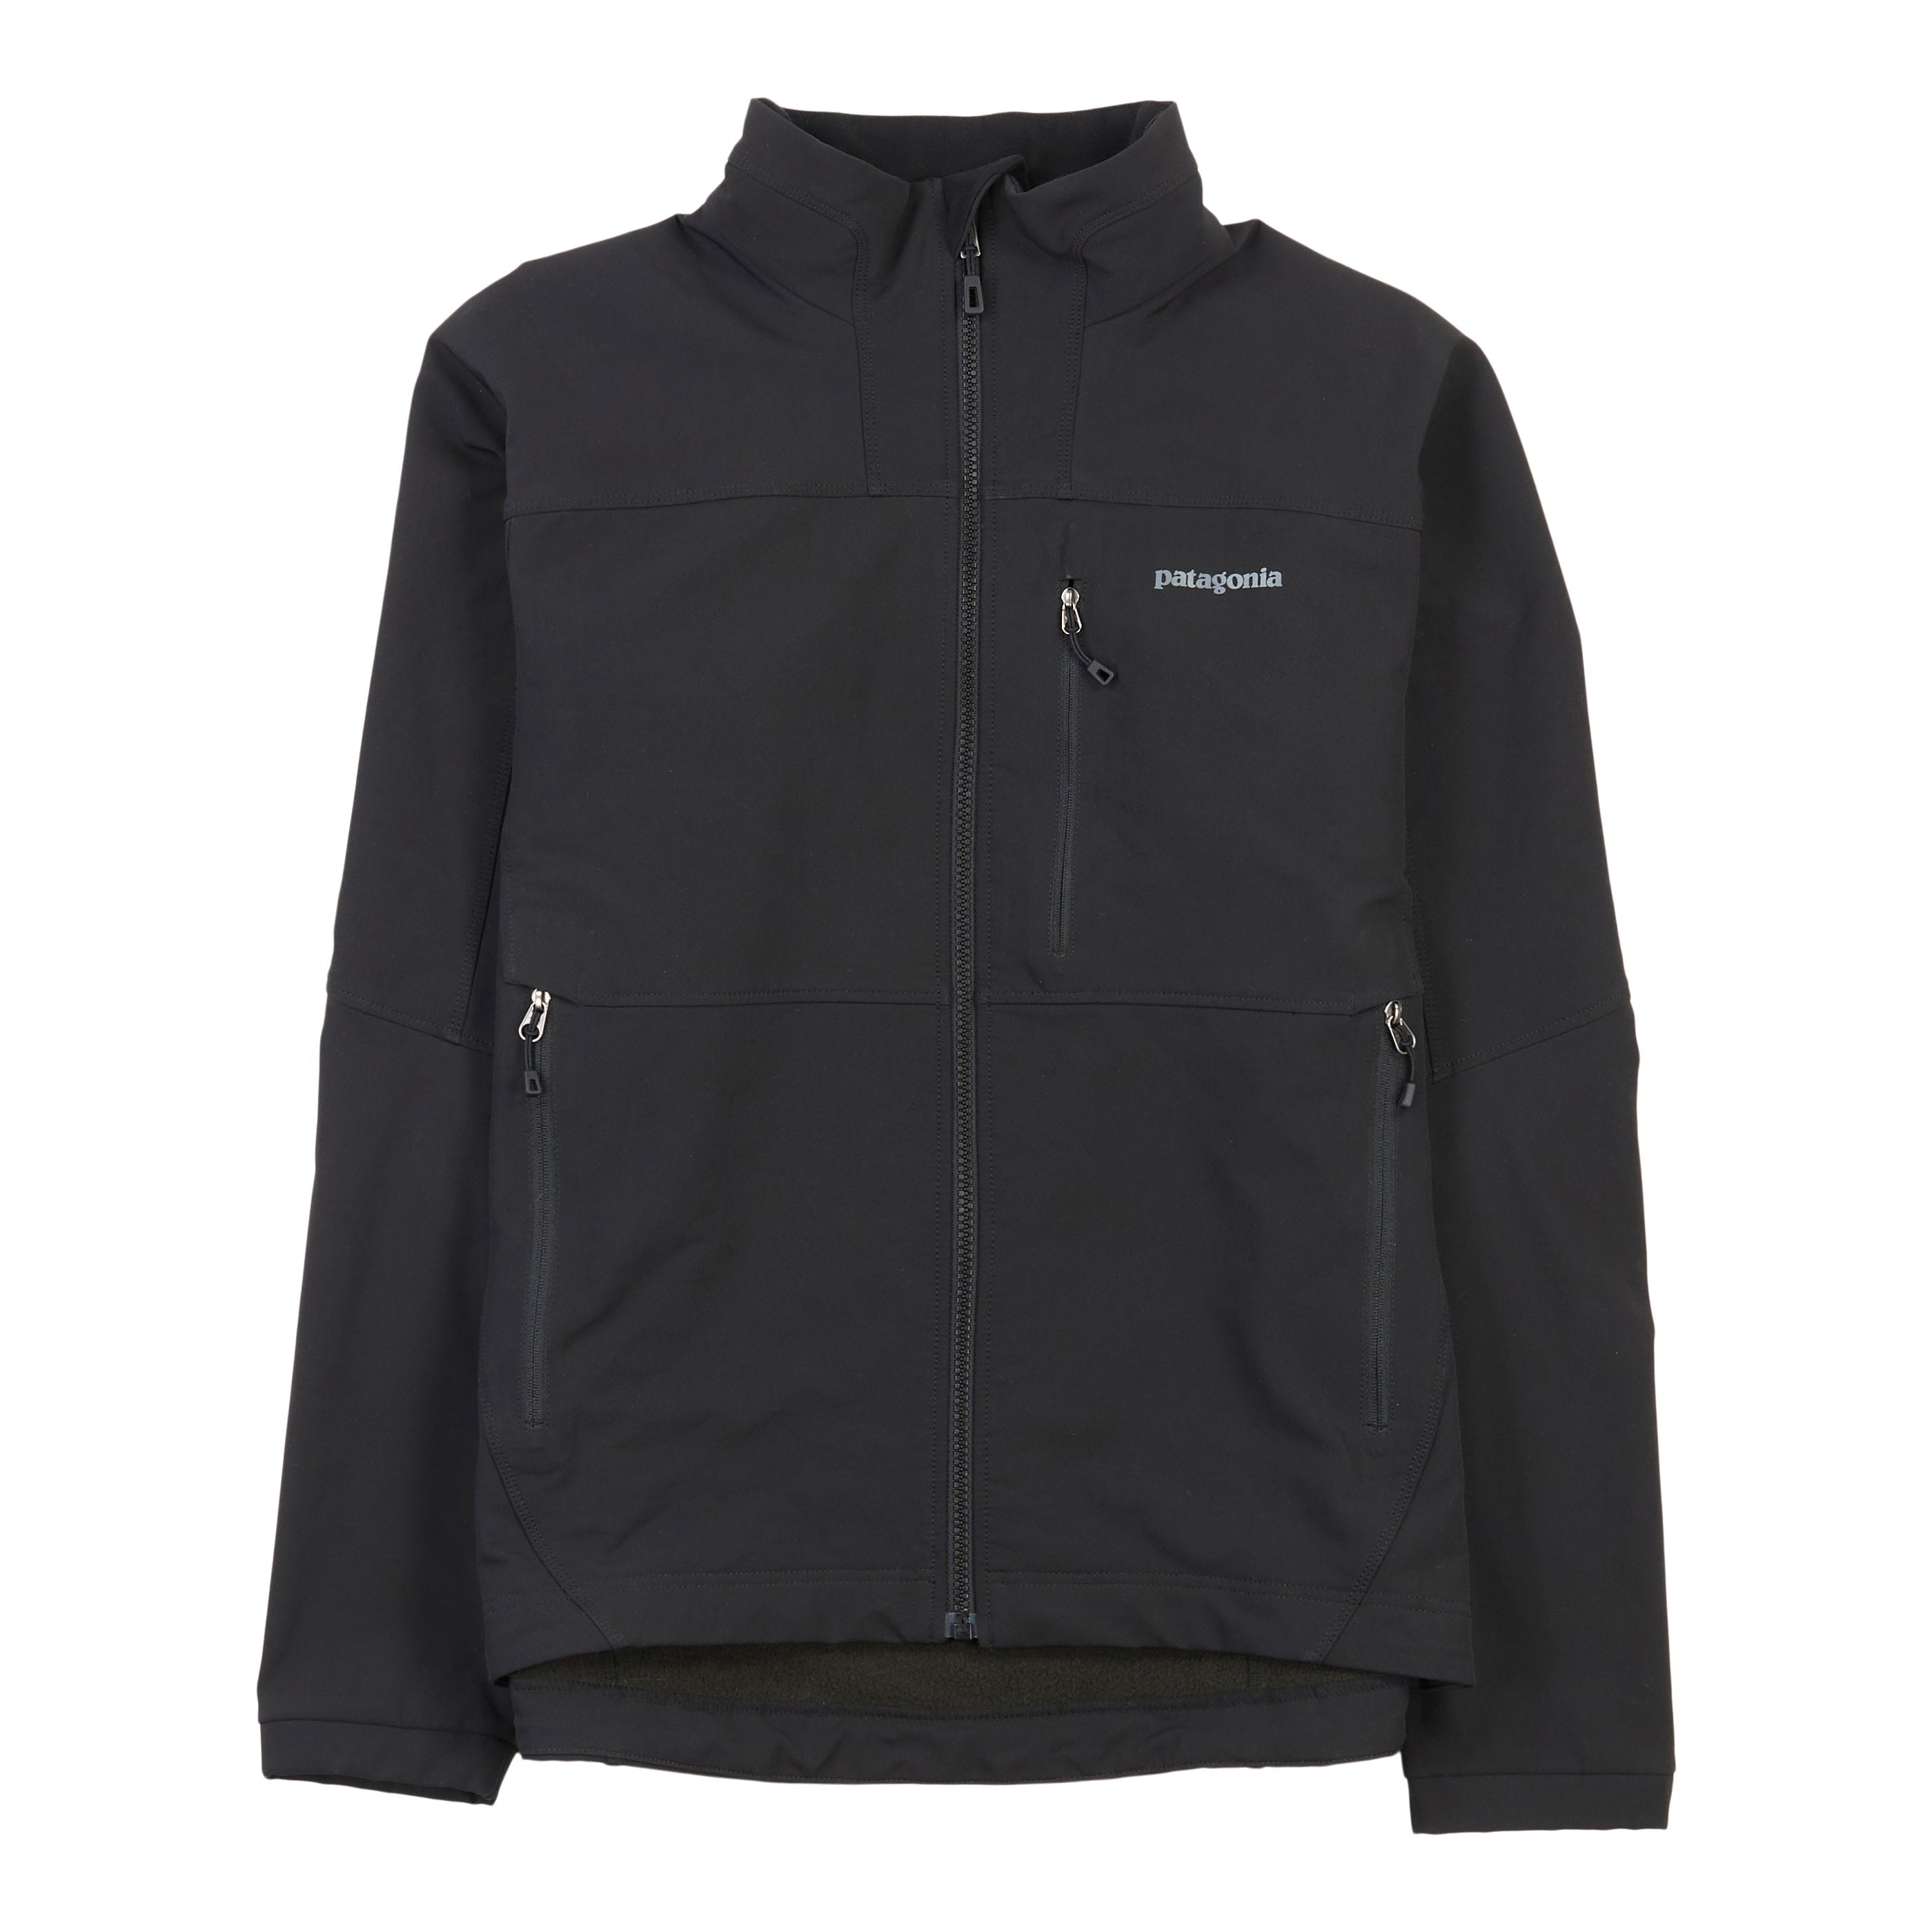 M's Special Guide Jacket